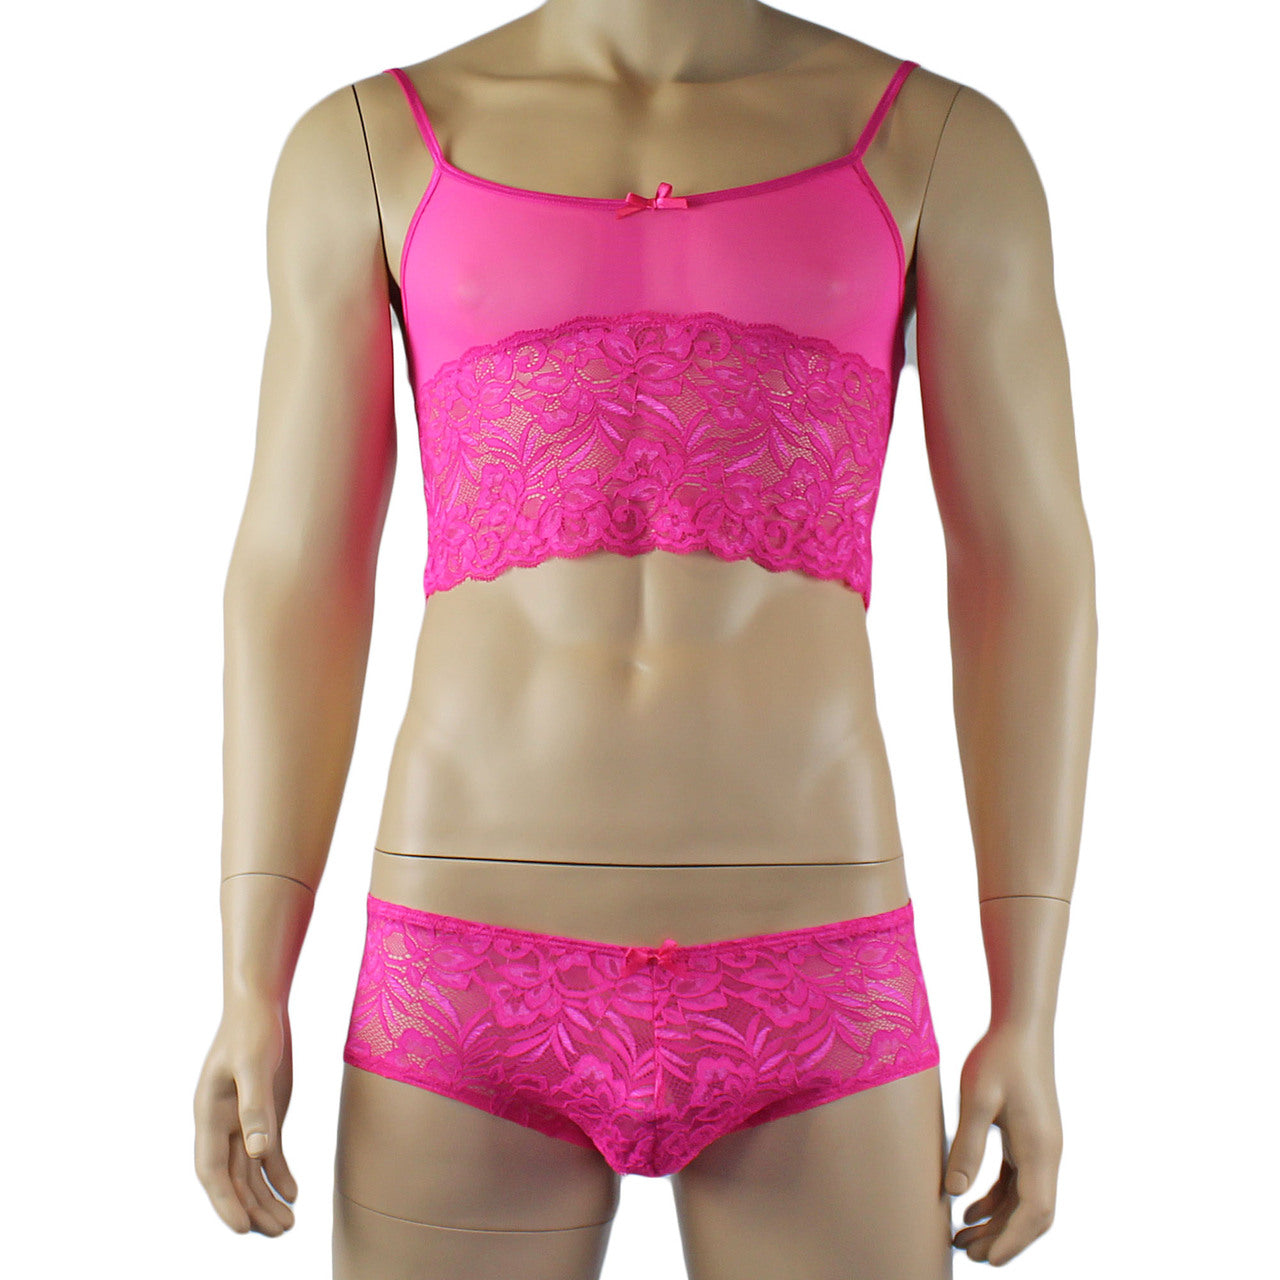 Mens Kristy Sexy Lace Camisole Top and Panty Brief Hot Pink